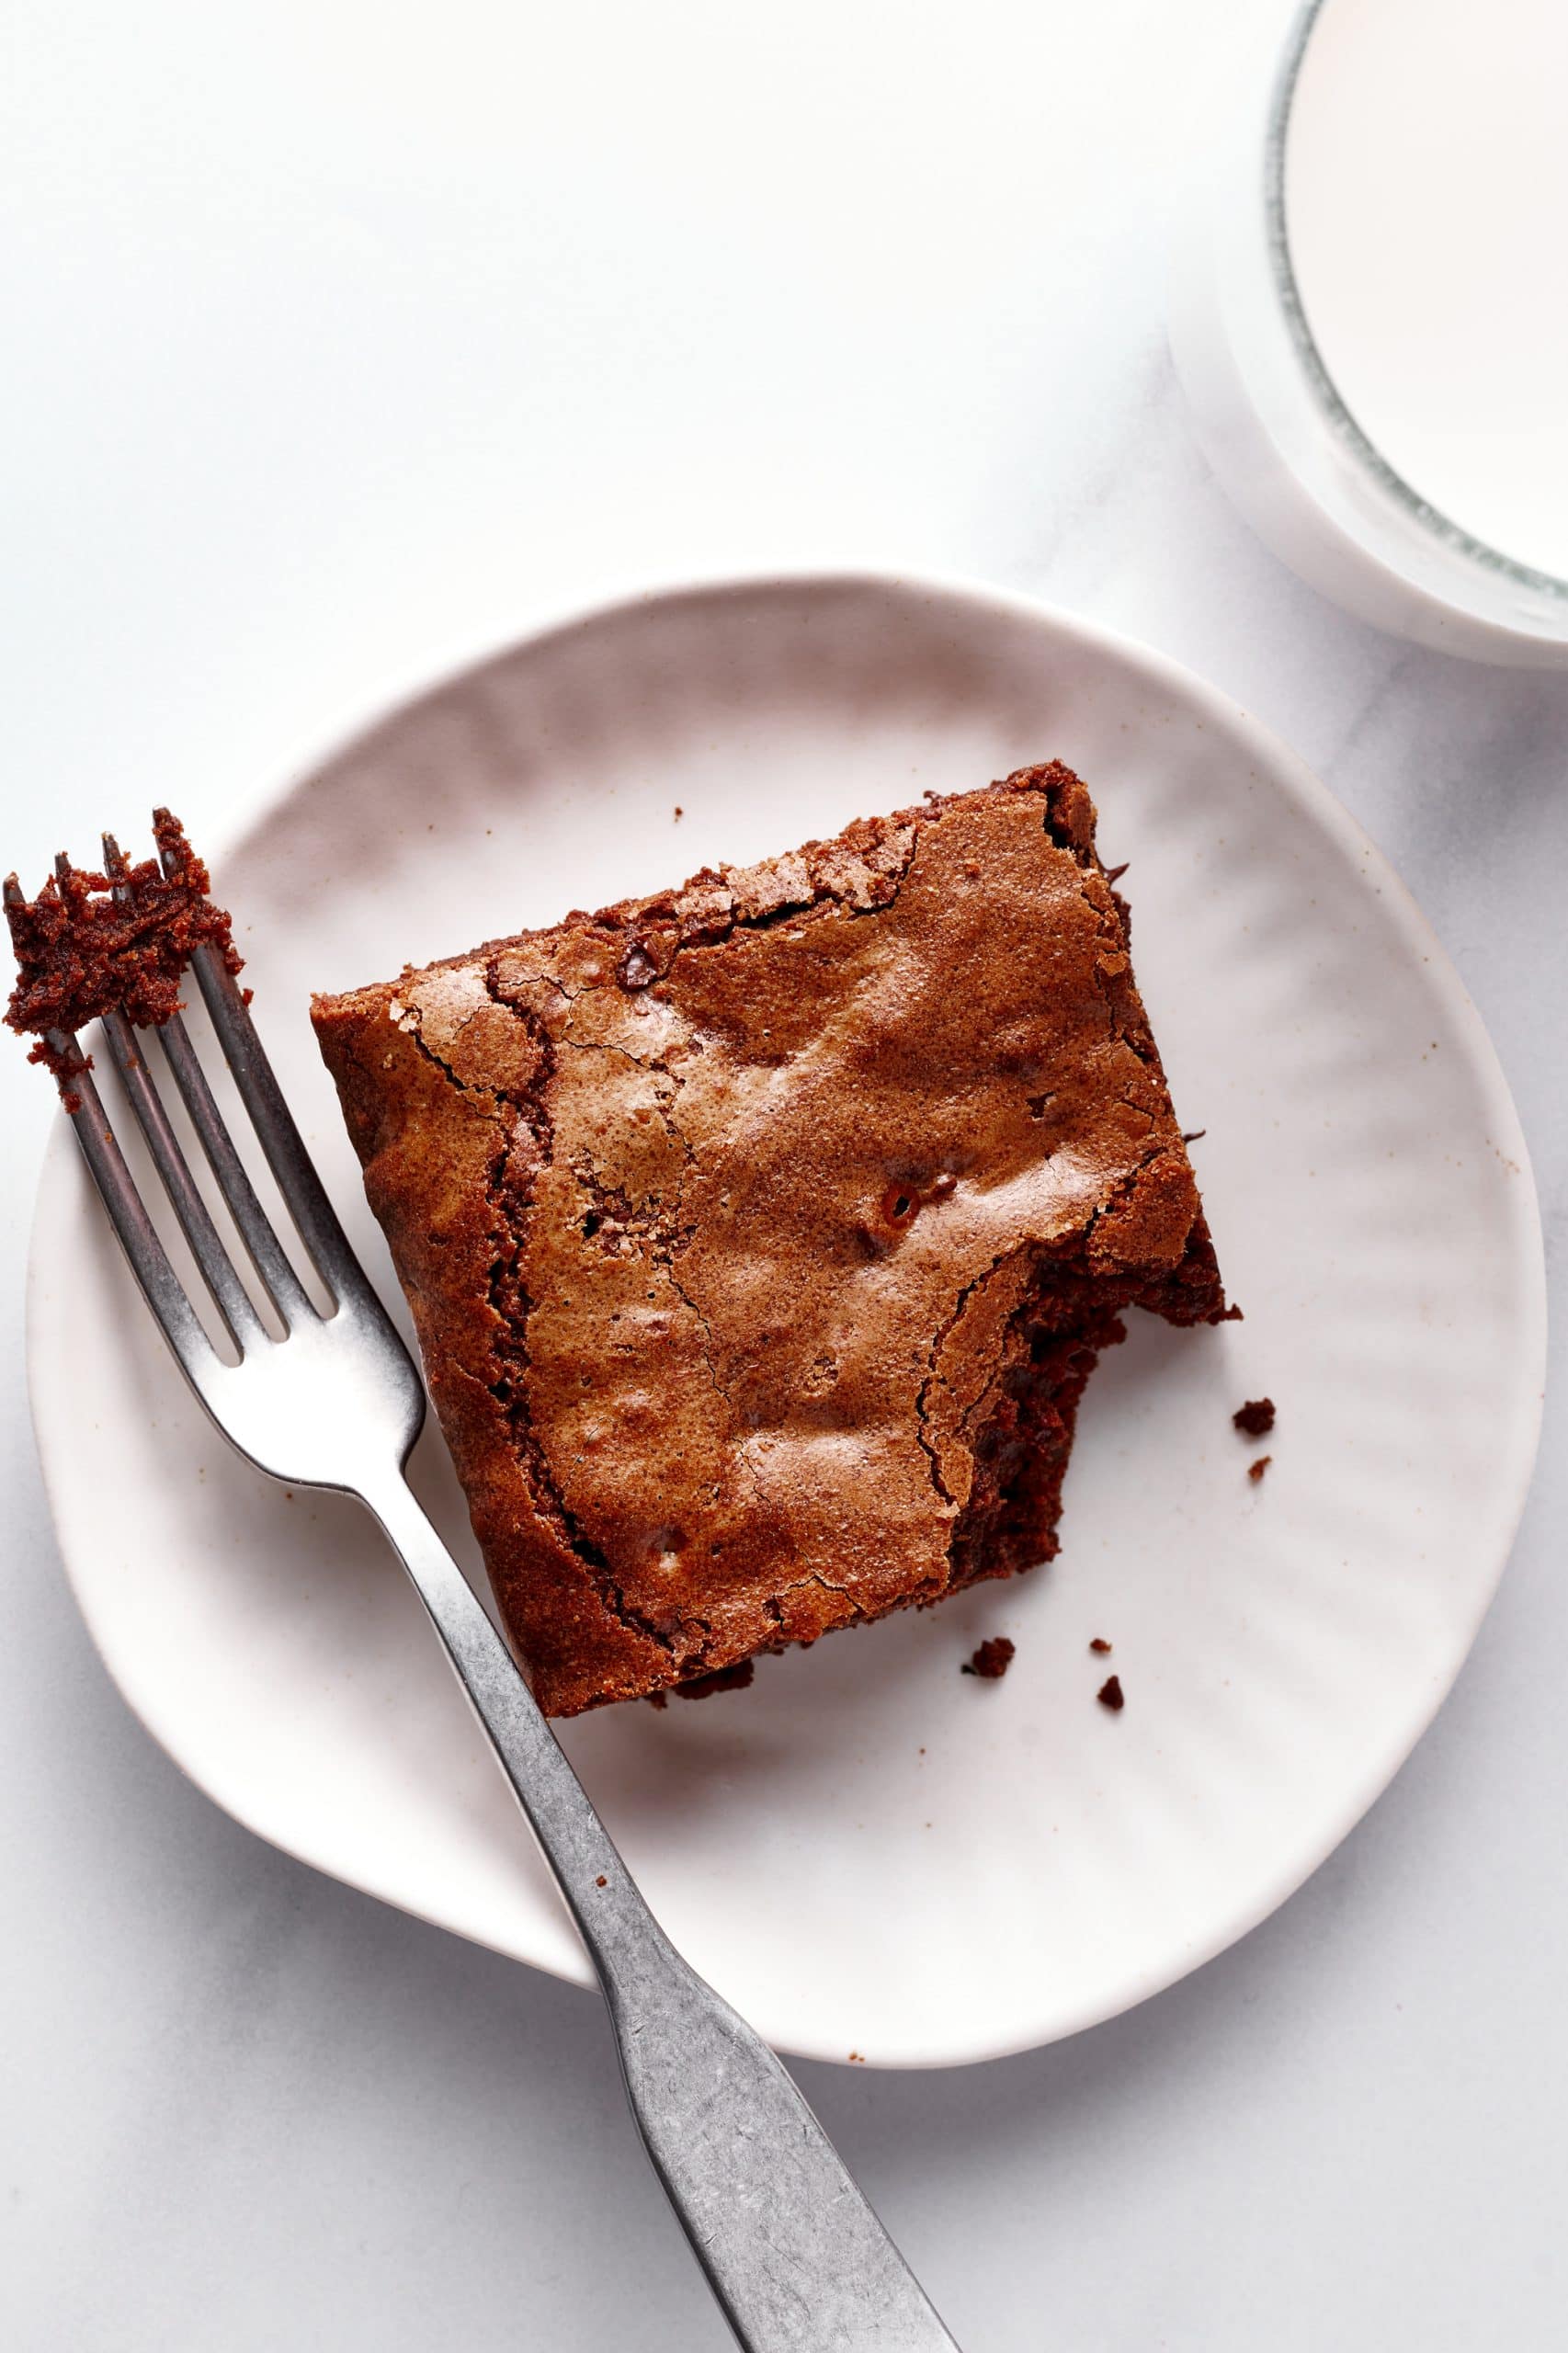 slice of brownie on a plate with a fork, with a bake taken out